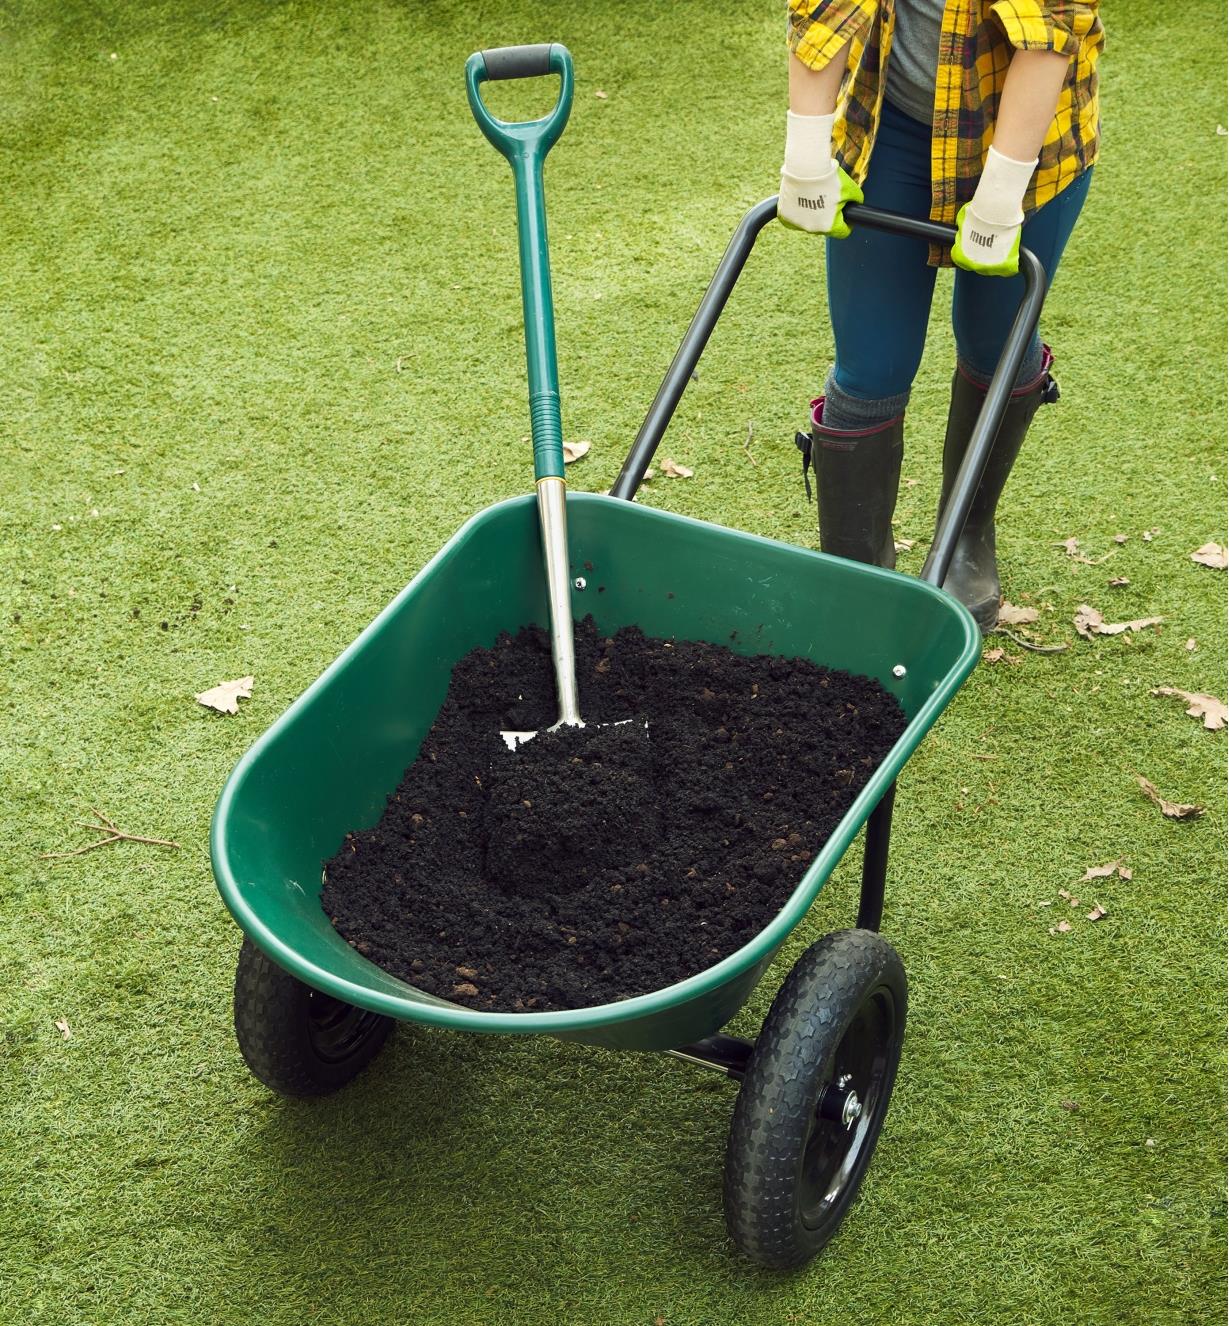 The wheelbarrow with flat-free tires filled with garden soil and a shovel